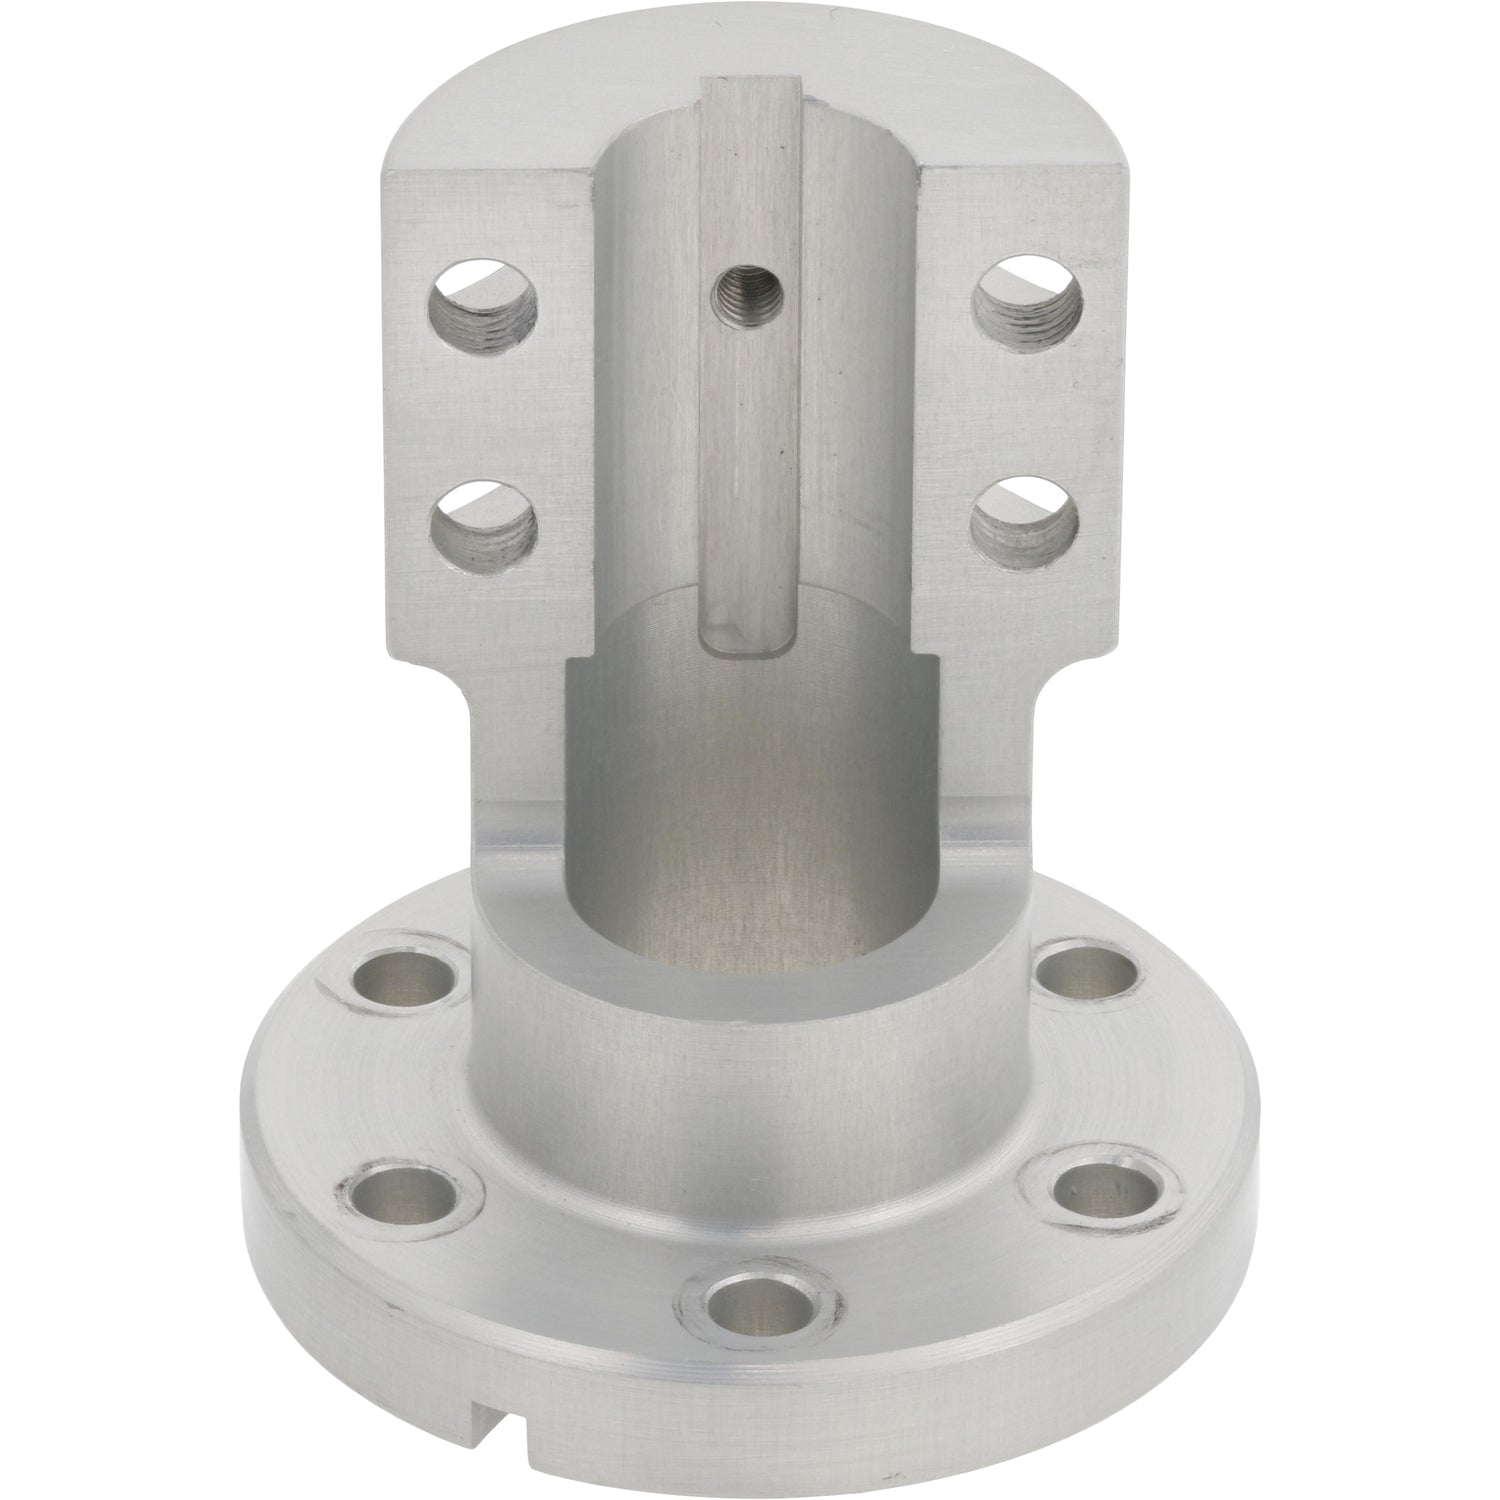 Machined aluminum spindle part with multiple threaded mounting holes on white background. 